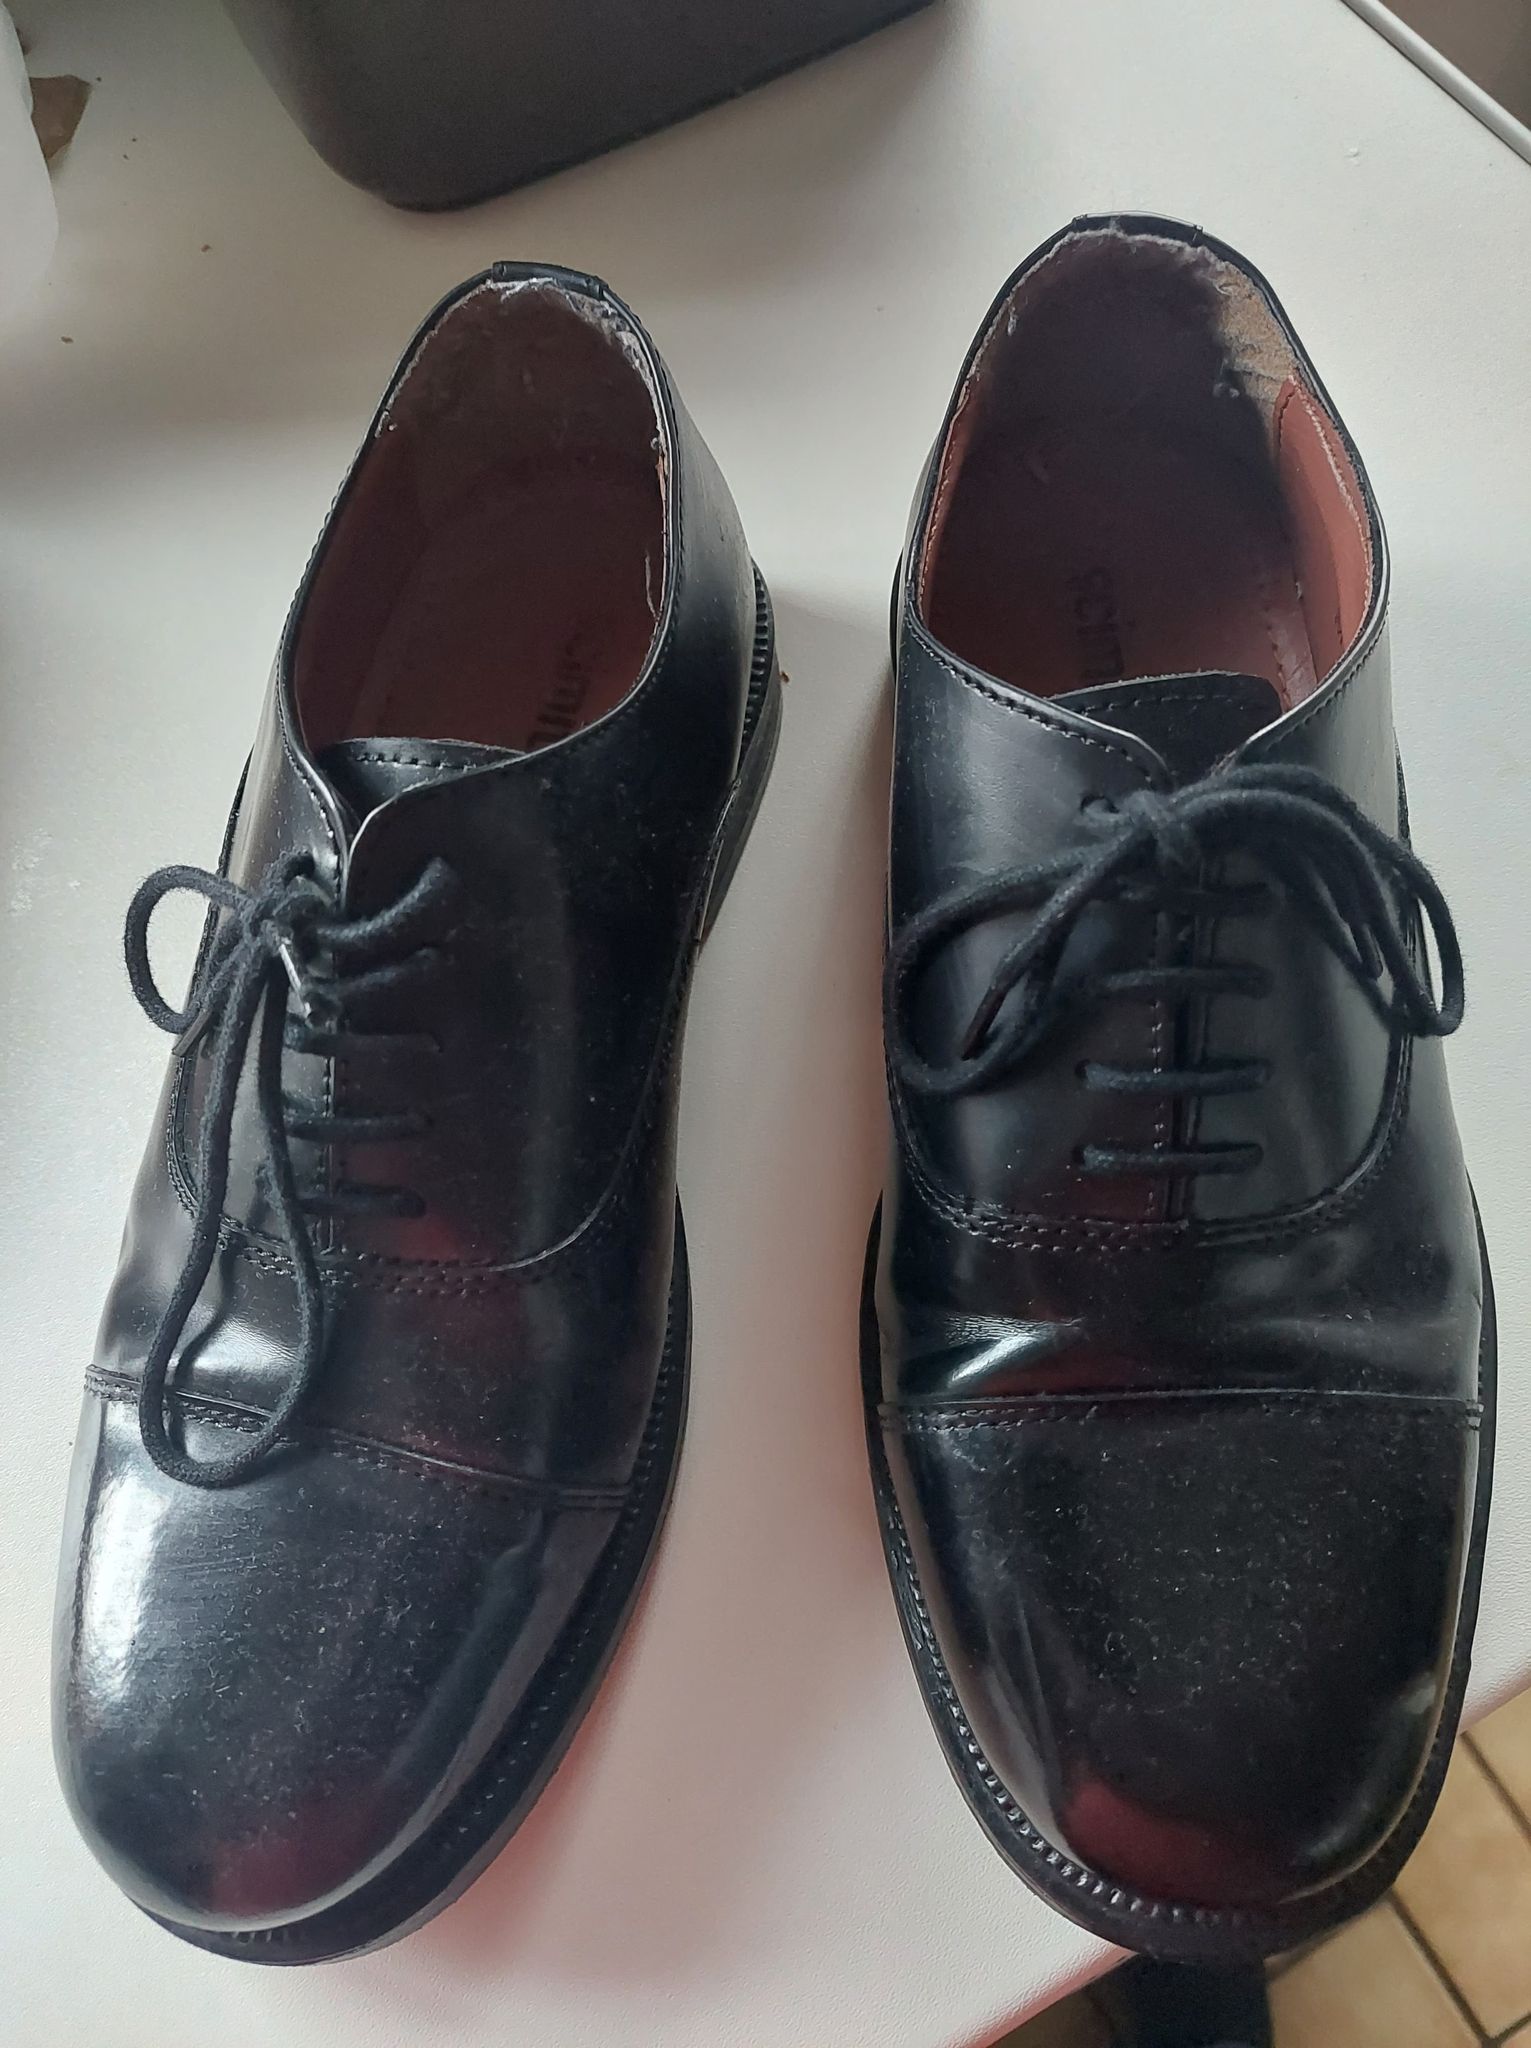 Cadet parade shoes size 7 - Sales and Wants - Air Cadet Central